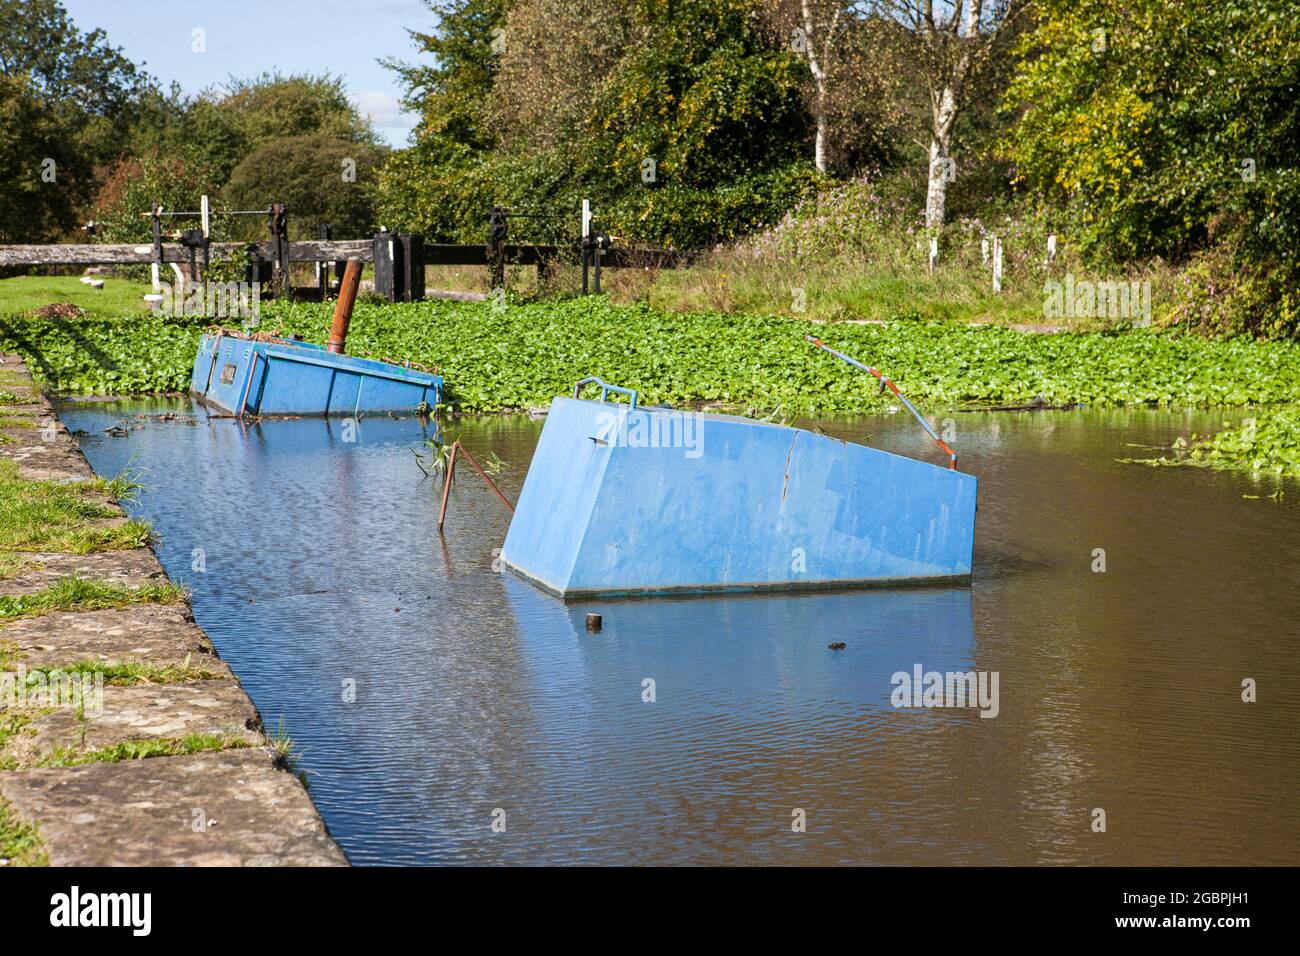 This shipwreck or otherwise boatwreck sank during the winter at Parbold Locks on the Leeds to Liverpool Canal whilst moored. It is now potentially an Stock Photo